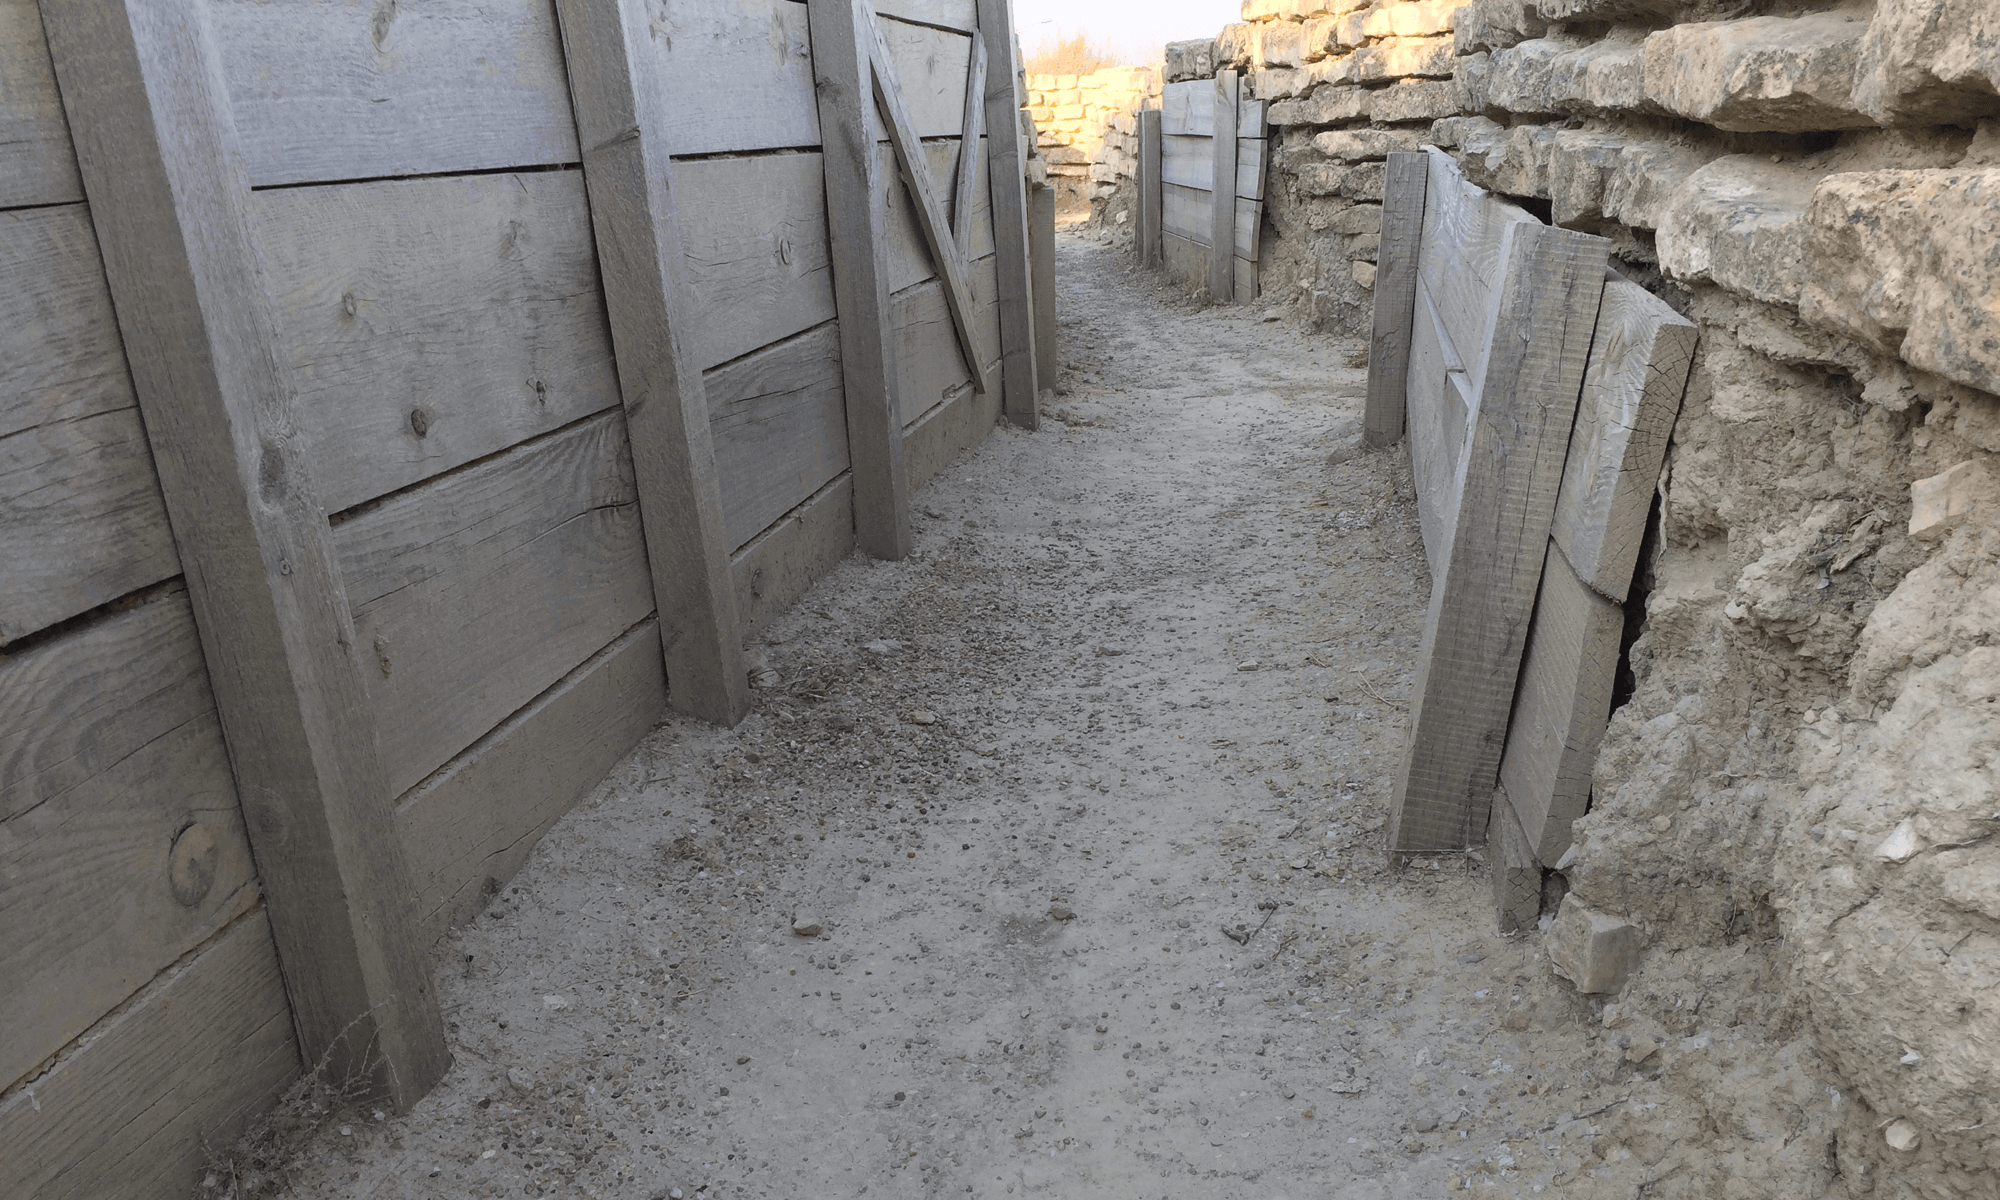 George Orwell Trenches in the Monegros, Spain